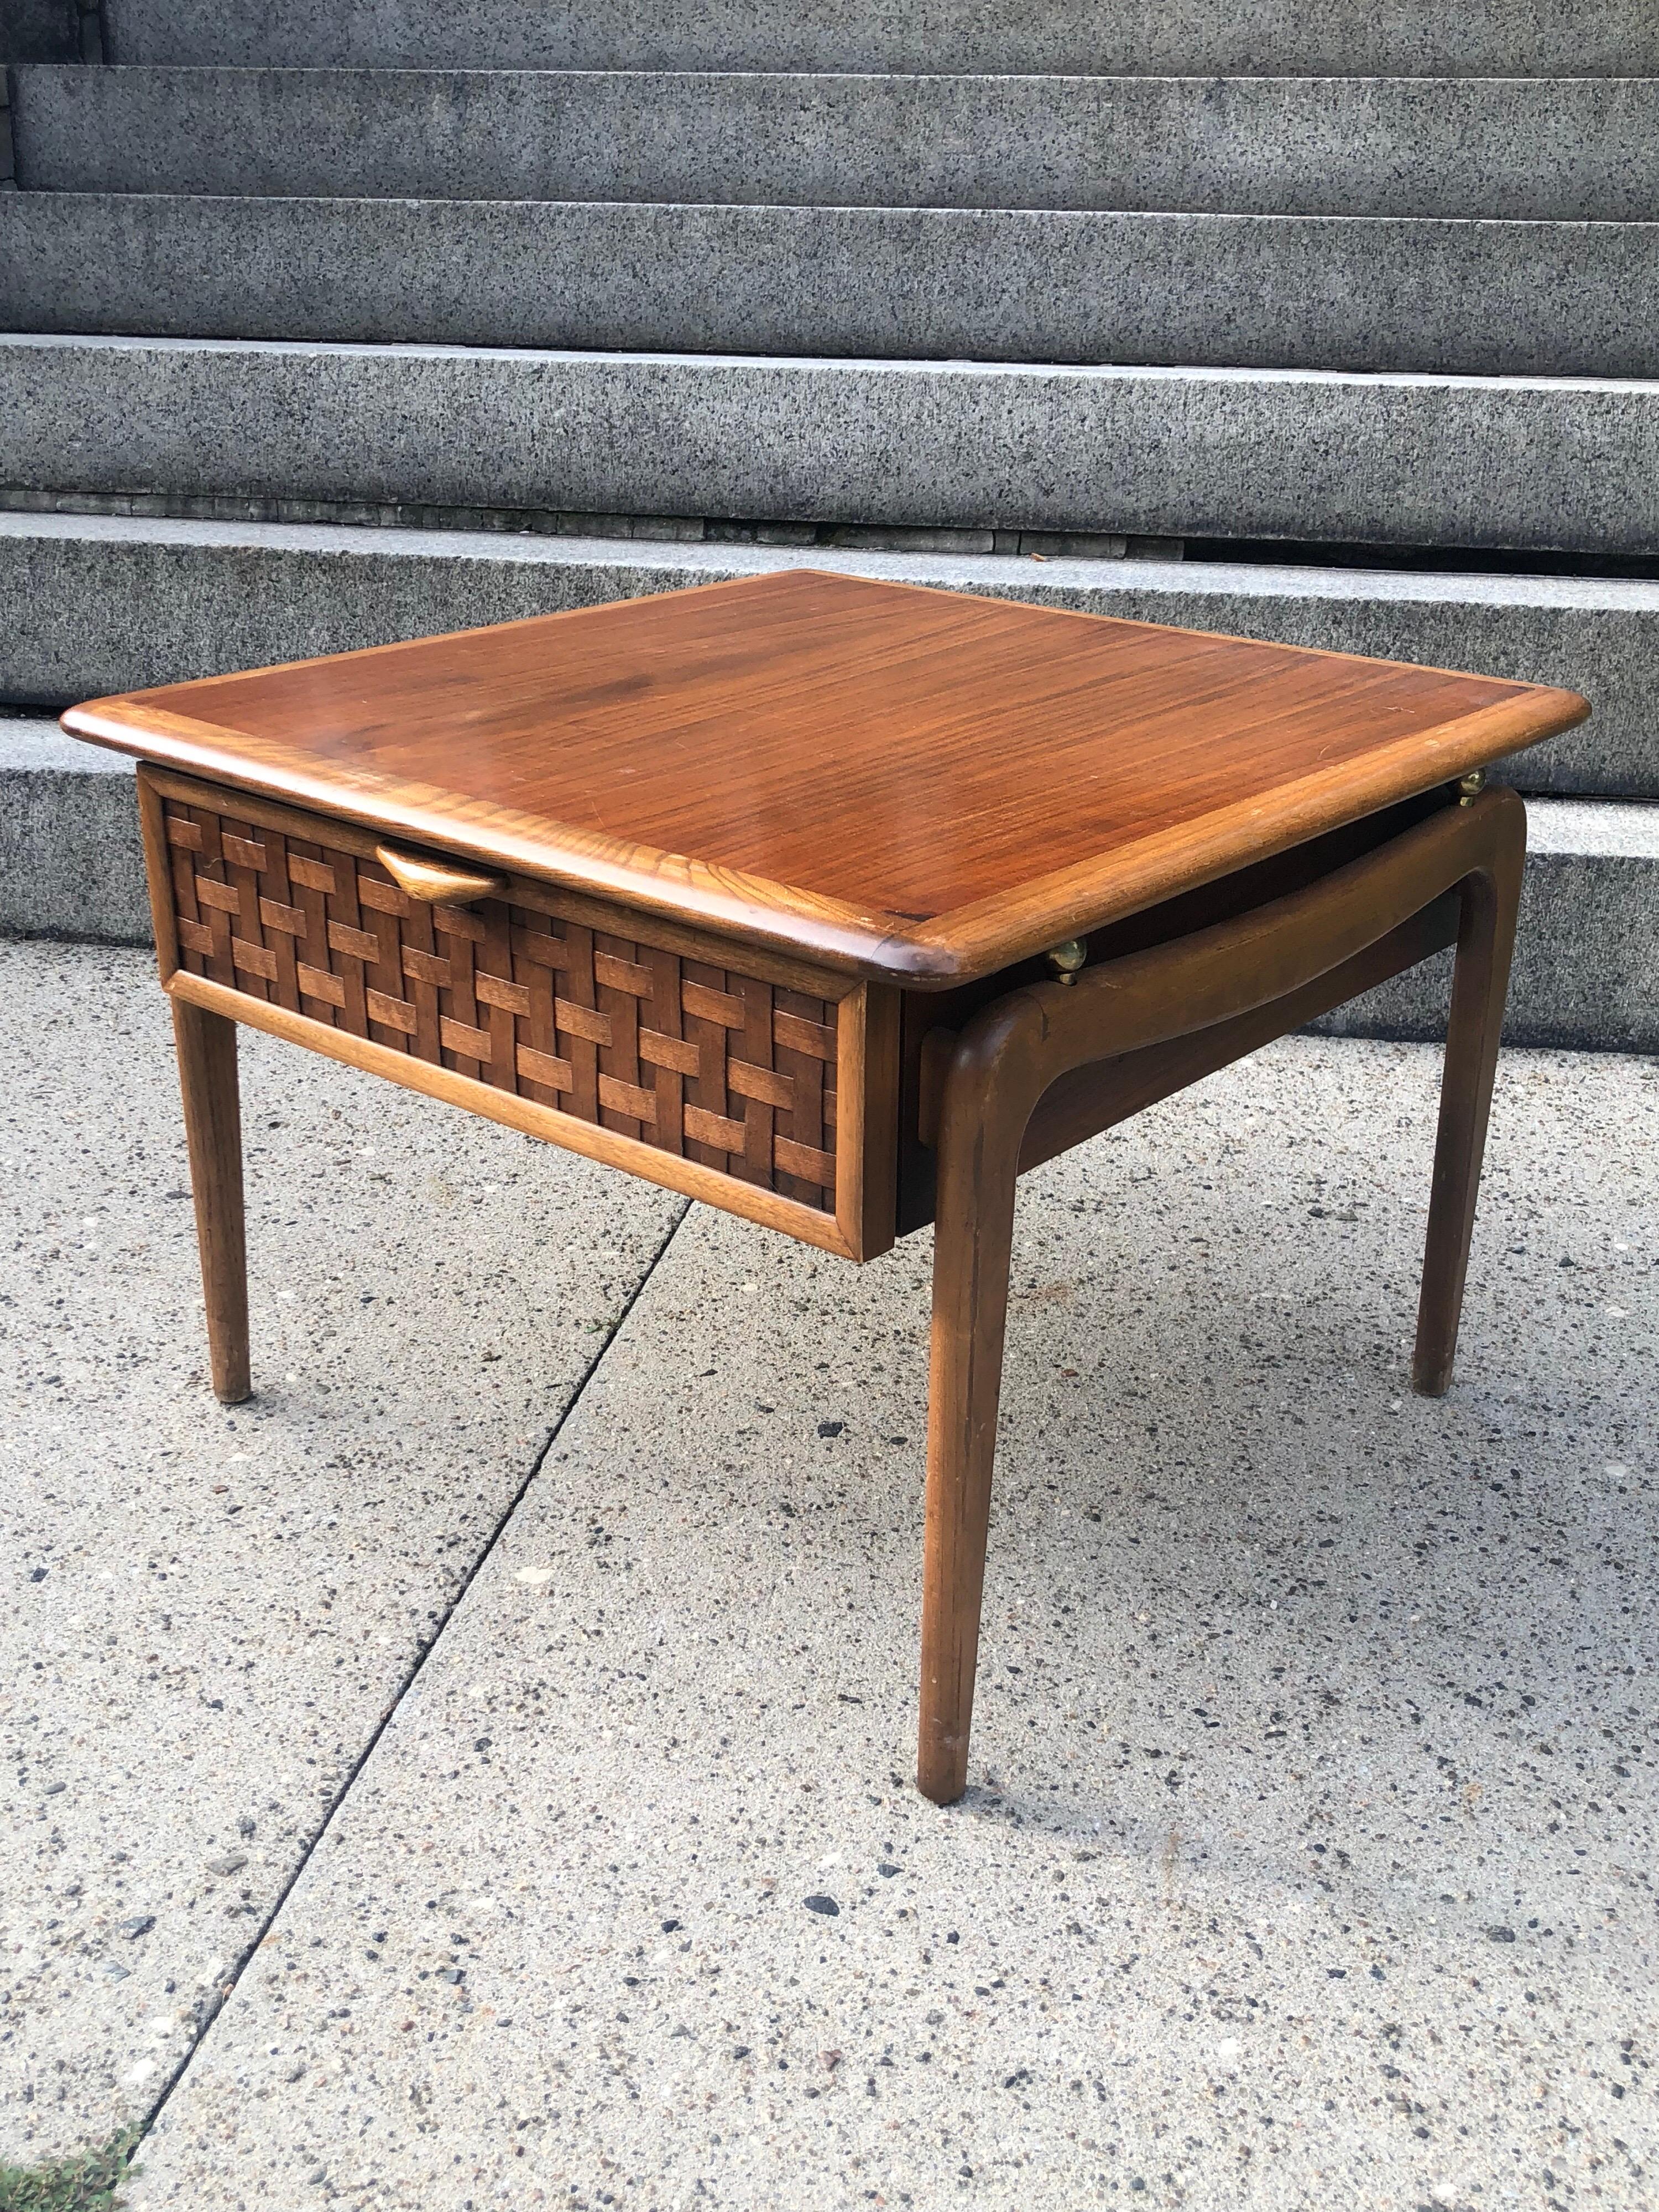 Lane cocktail or coffee table in solid walnut. In very good original condition. Great color and grain detail. Signed on underside of drawer.